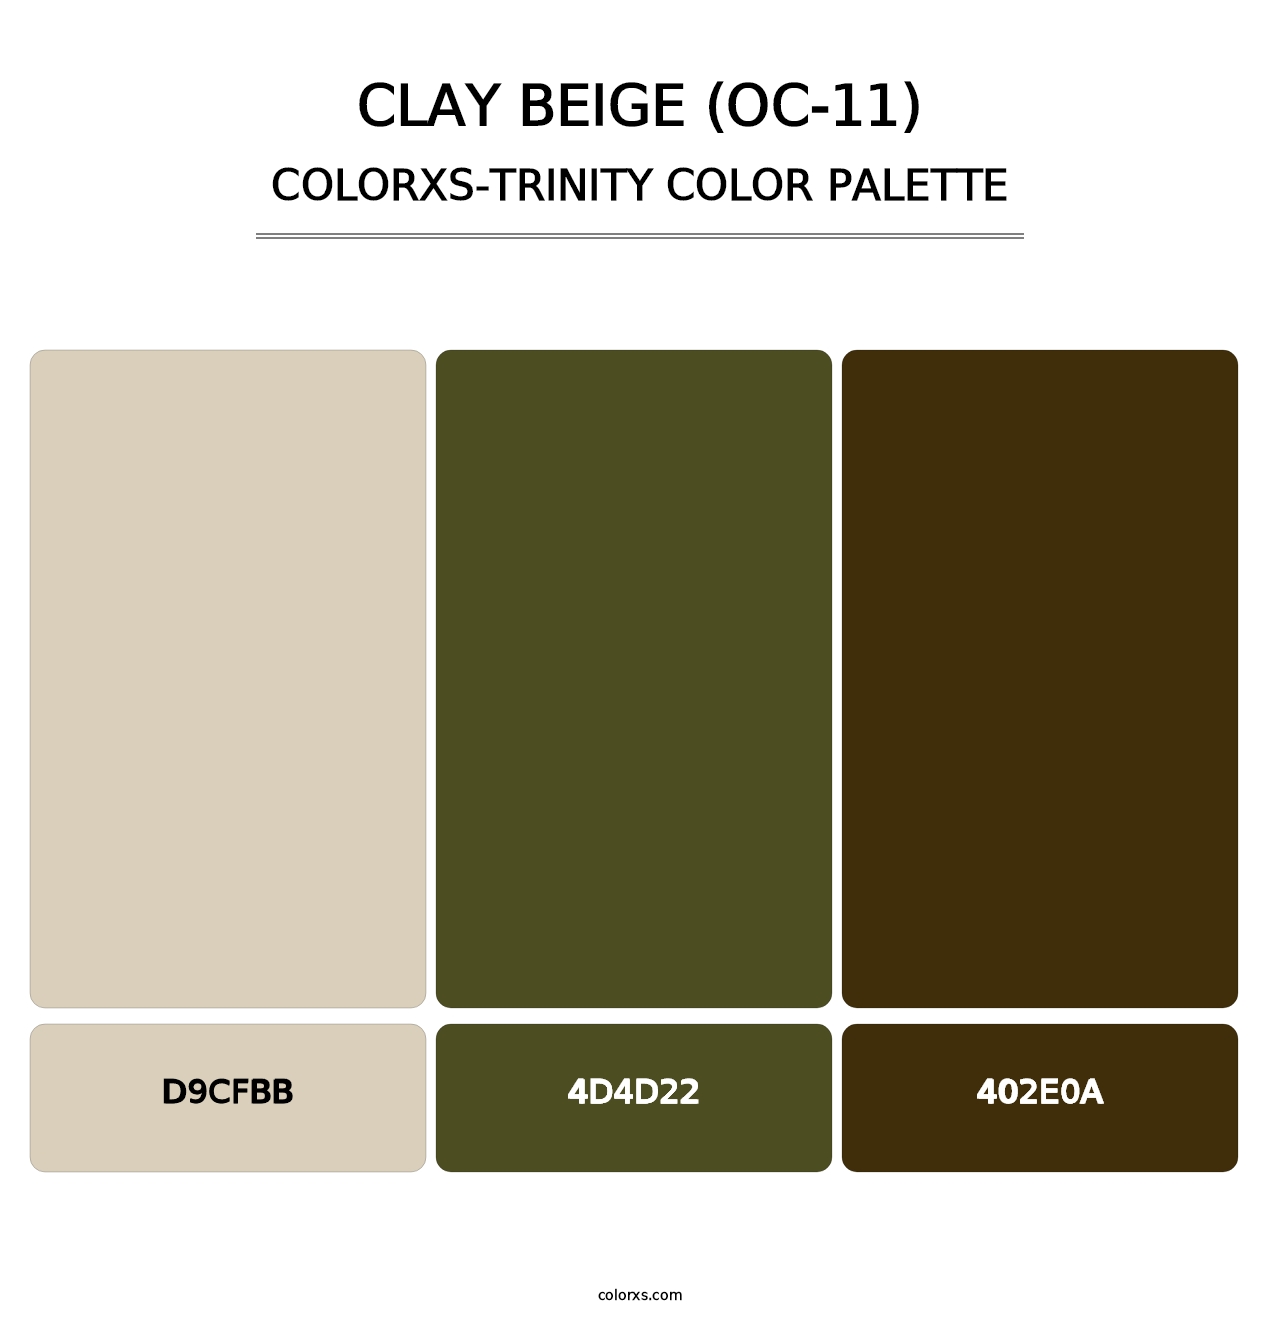 Clay Beige (OC-11) - Colorxs Trinity Palette